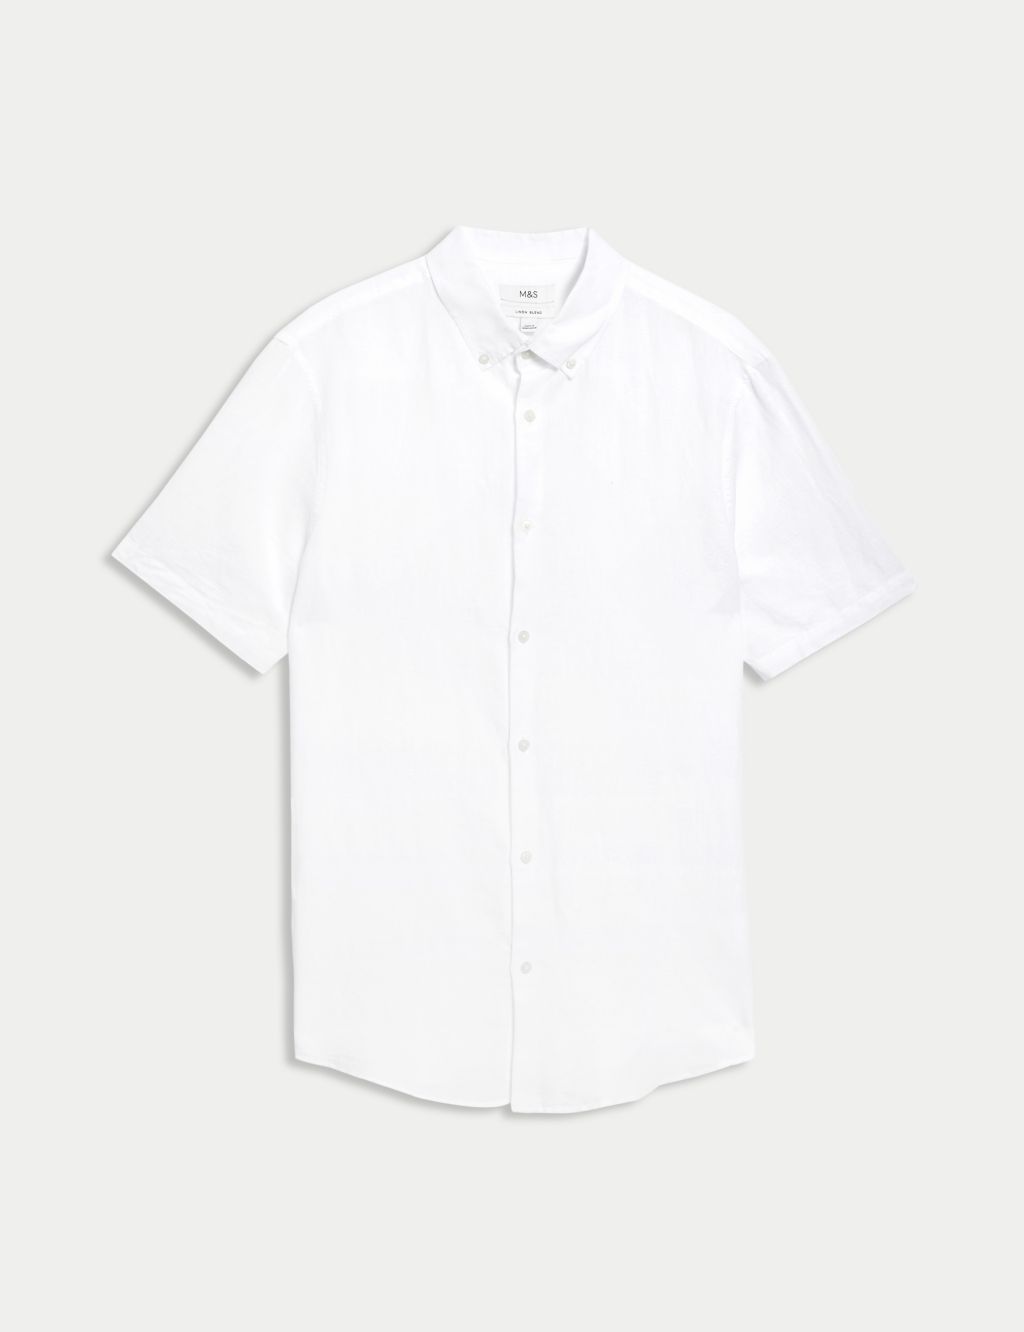 Easy Iron Linen Rich Shirt | M&S Collection | M&S